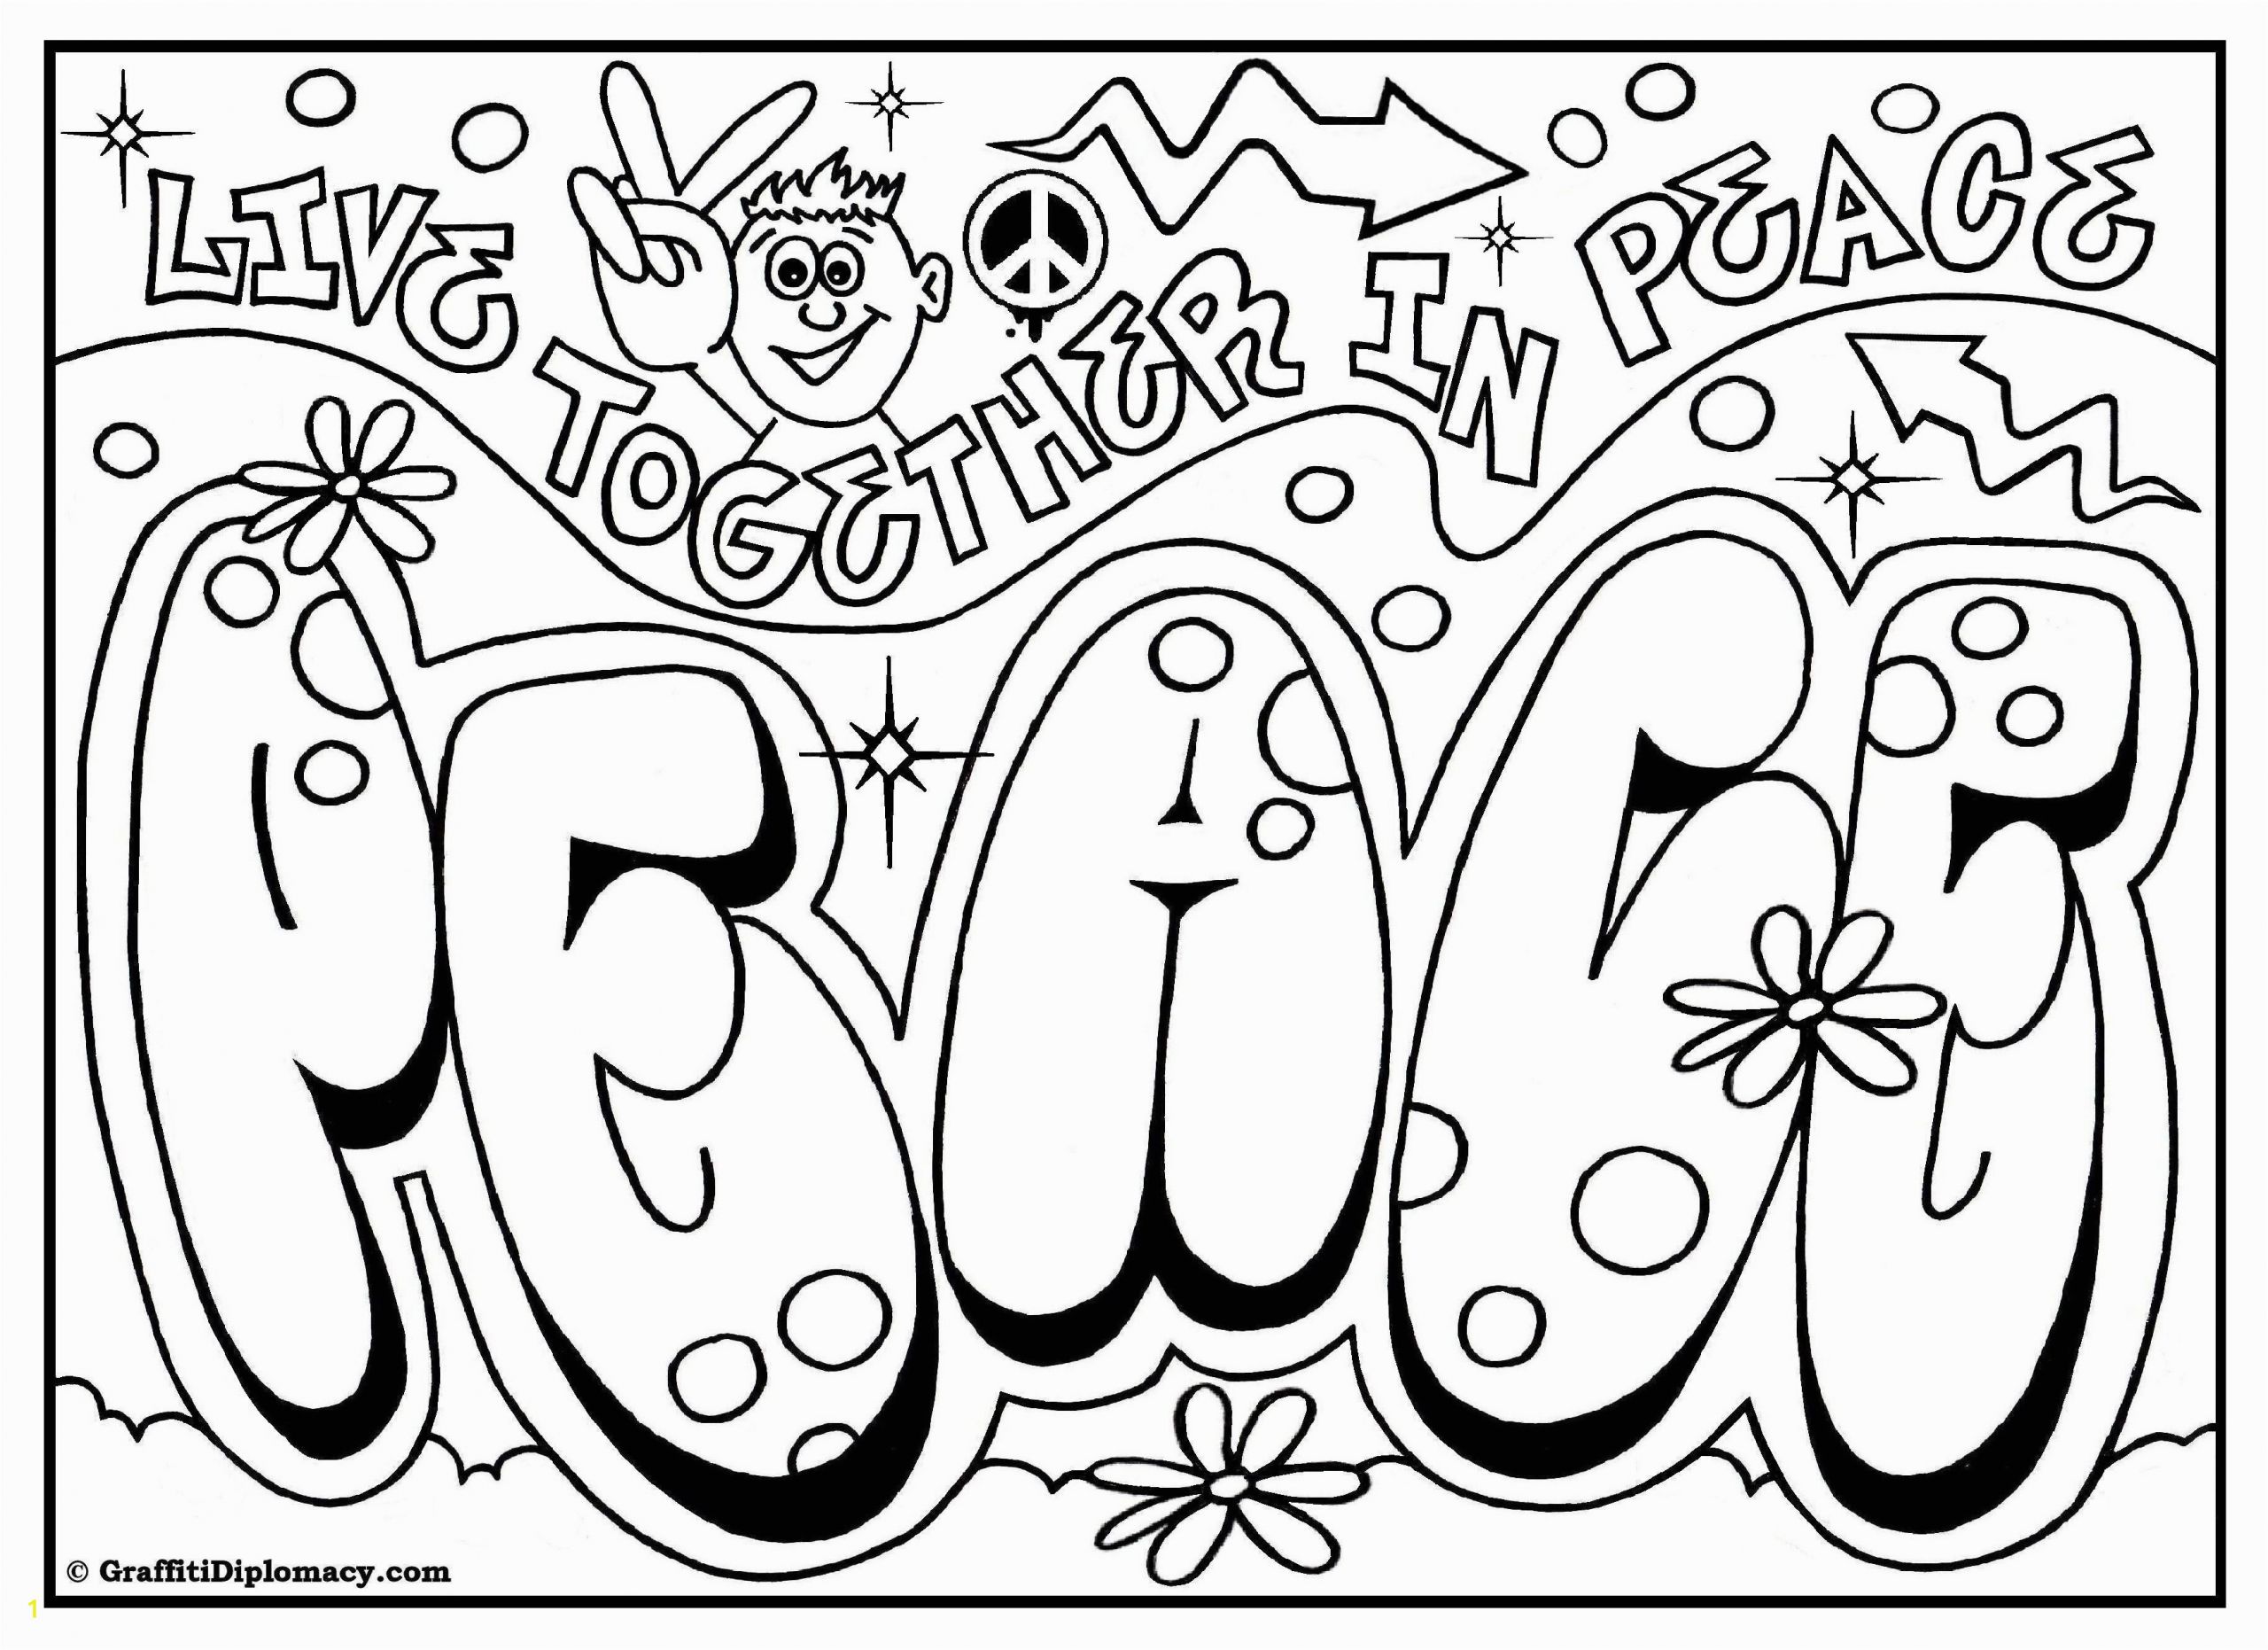 word of wisdom coloring page